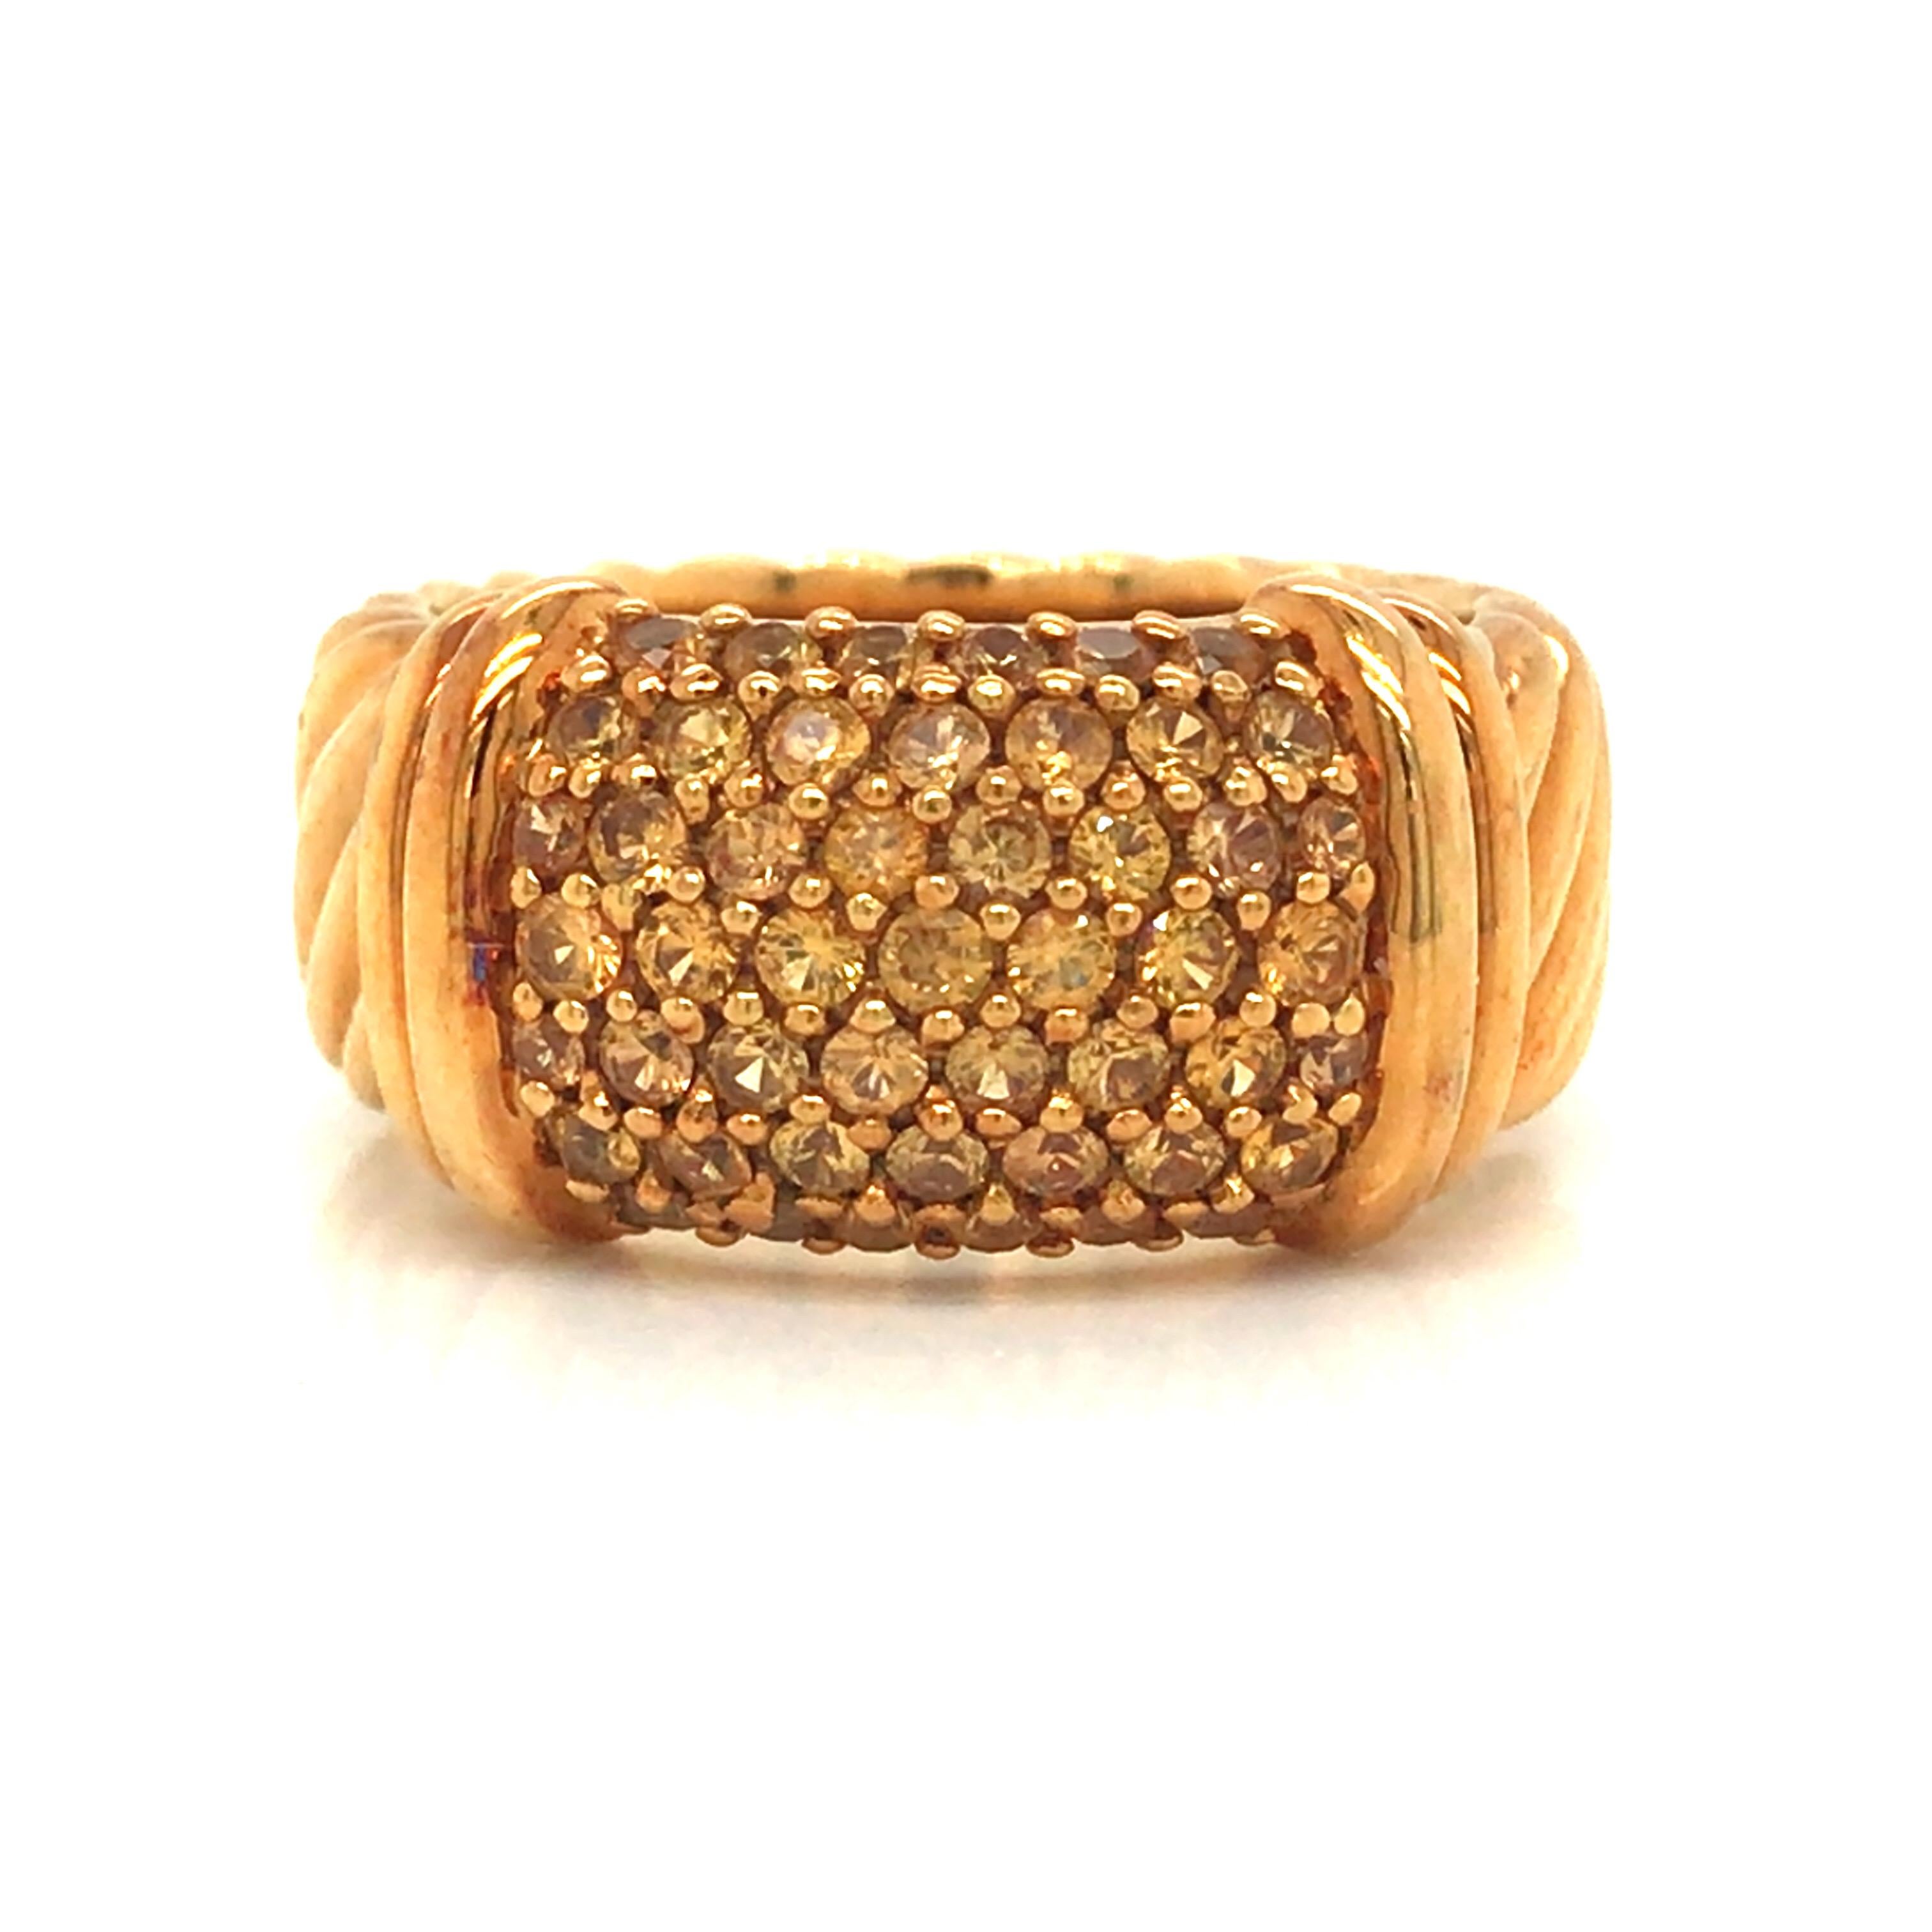 David Yurman Yellow Sapphire Band in 18K Yellow Gold.  Yellow Sapphires weighing 1.0 carat total weight are expertly set.  The Ring measures 3/8 inch in width. Ring size 6. 11.9 grams.  Signed.